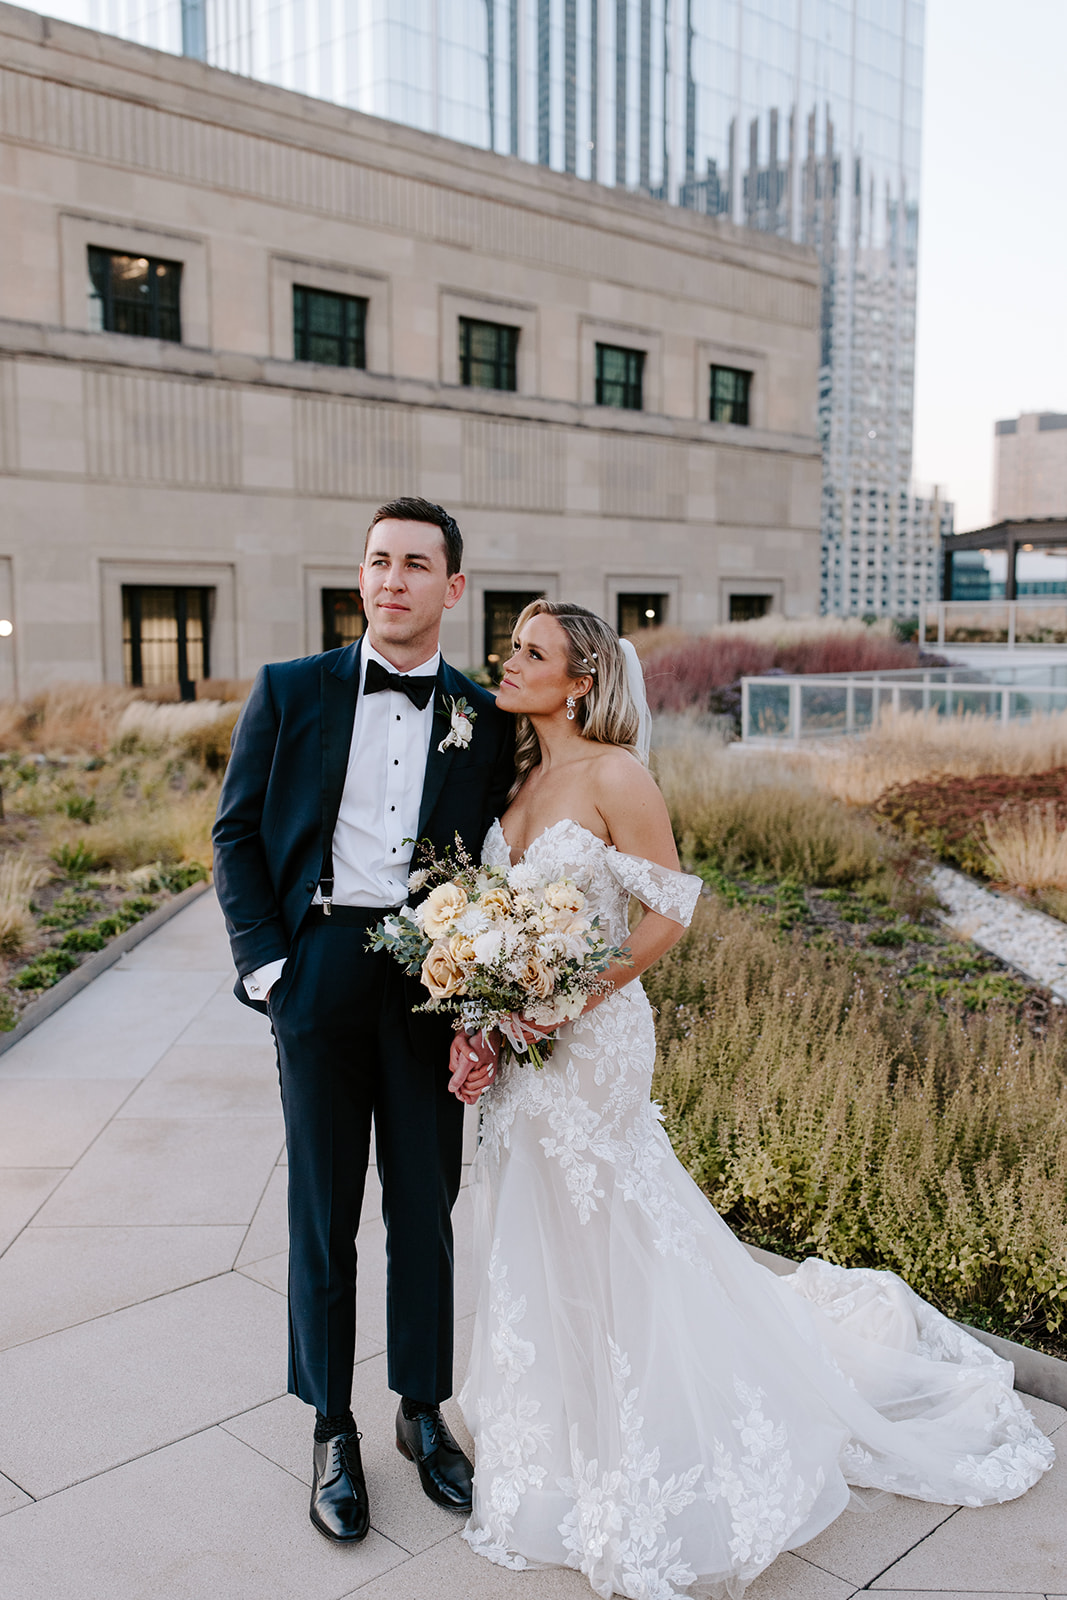 A beautiful chicago wedding in October 